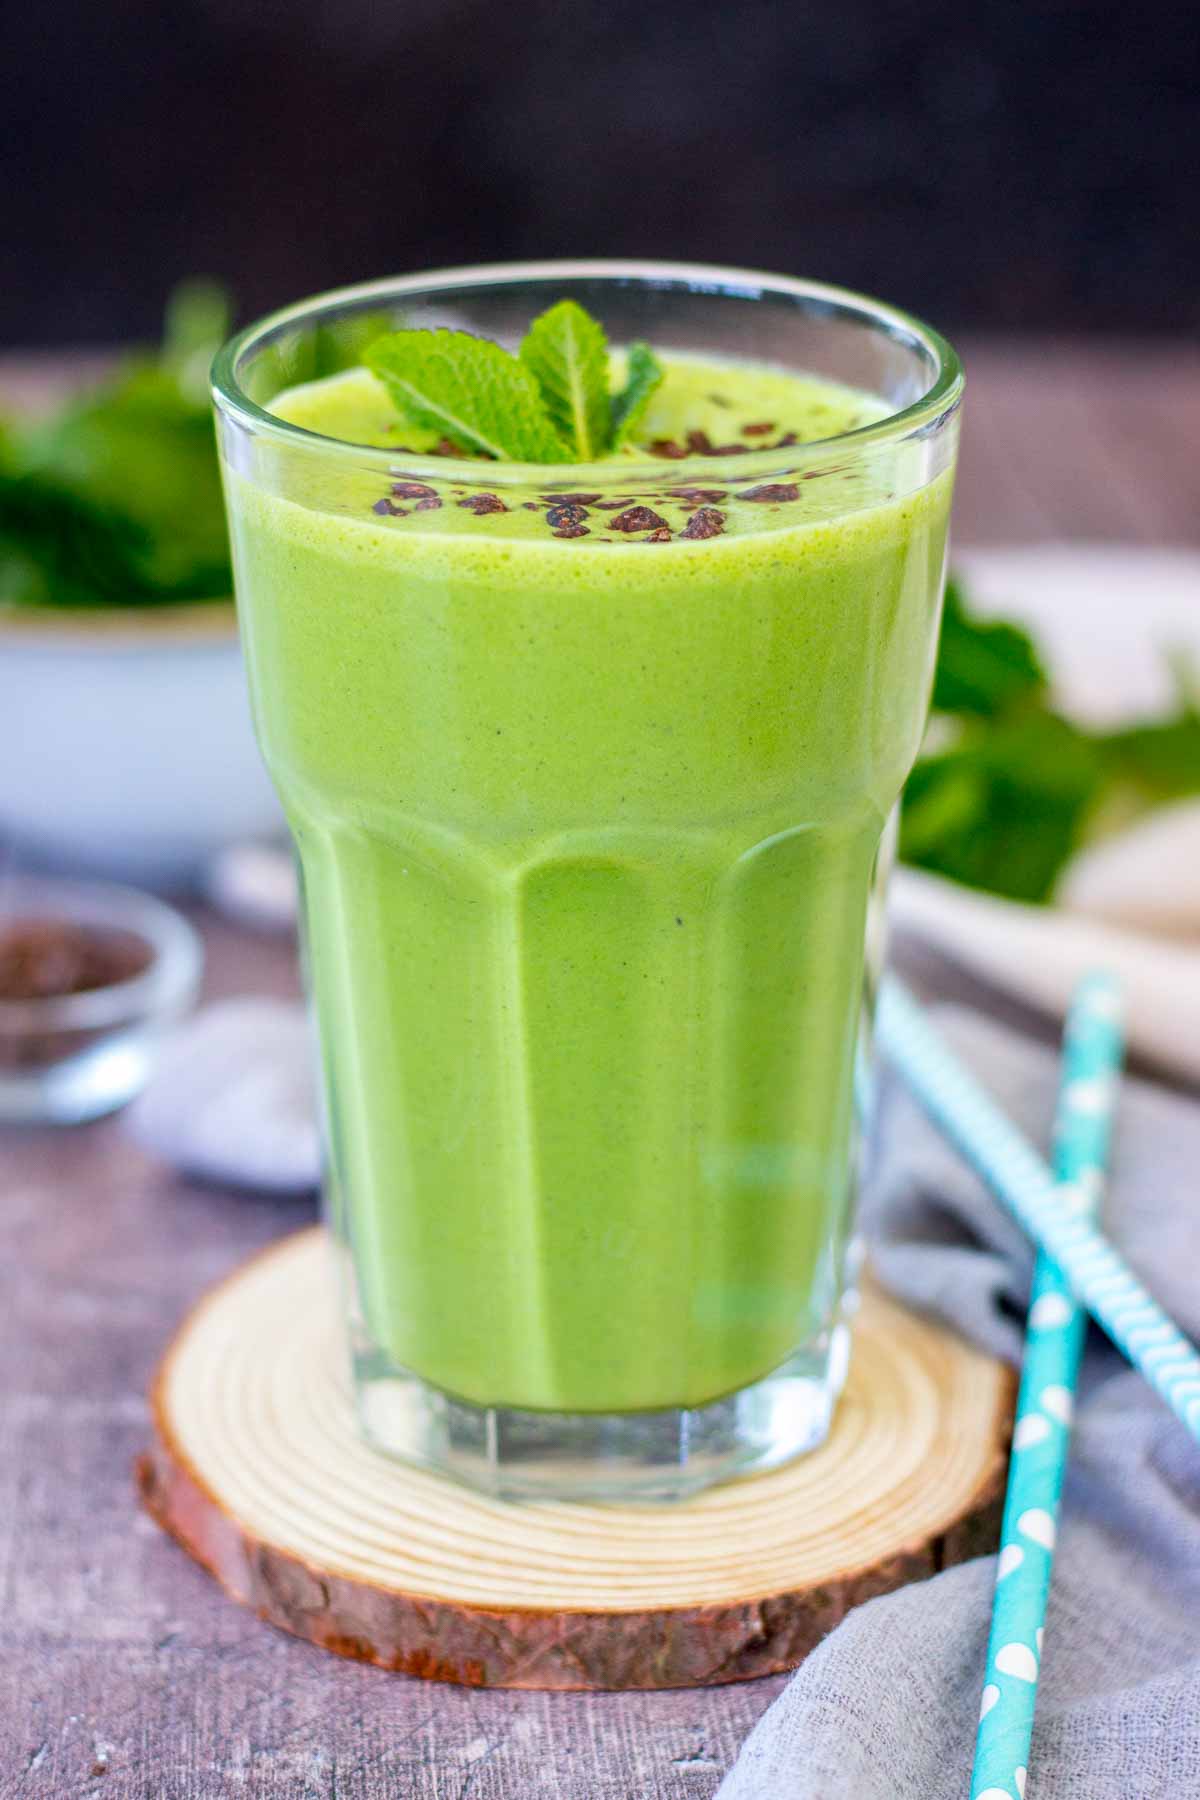 Shamrock protein shake served in a glass, topped with chocolate chips and fresh mint.